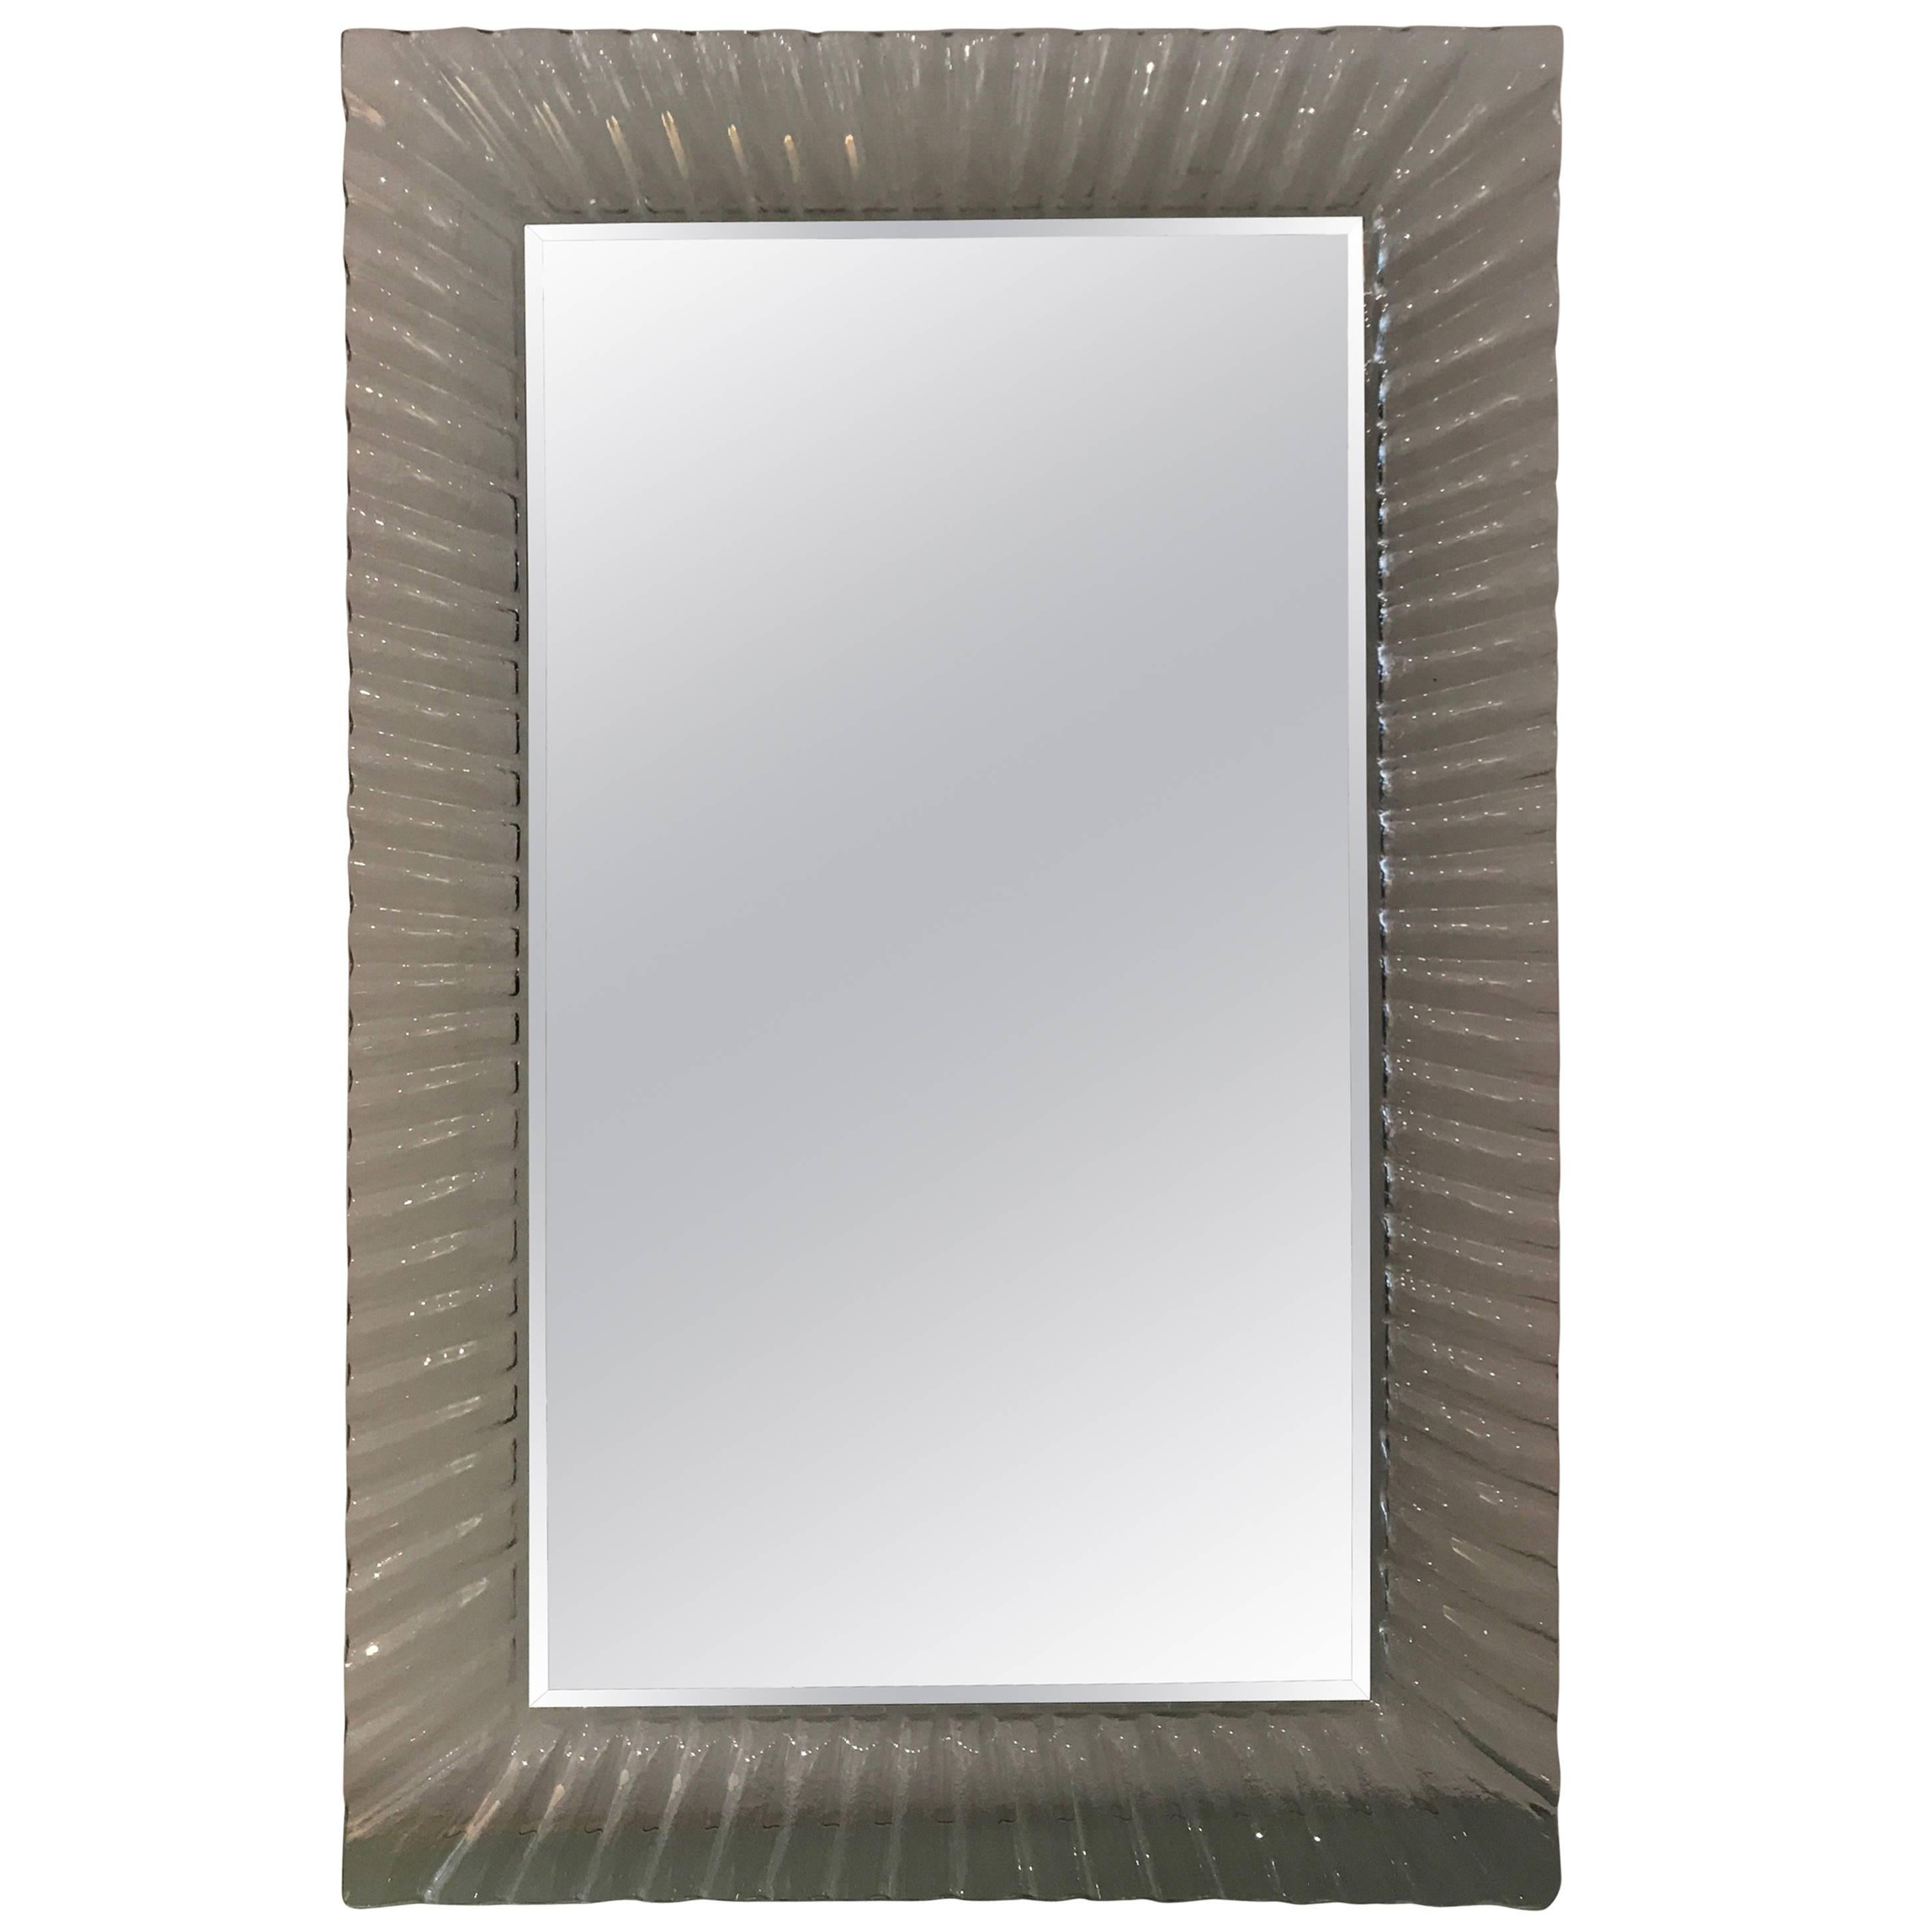 Midcentury Italian Mirror with a Fluted Clear Murano Glass Frame